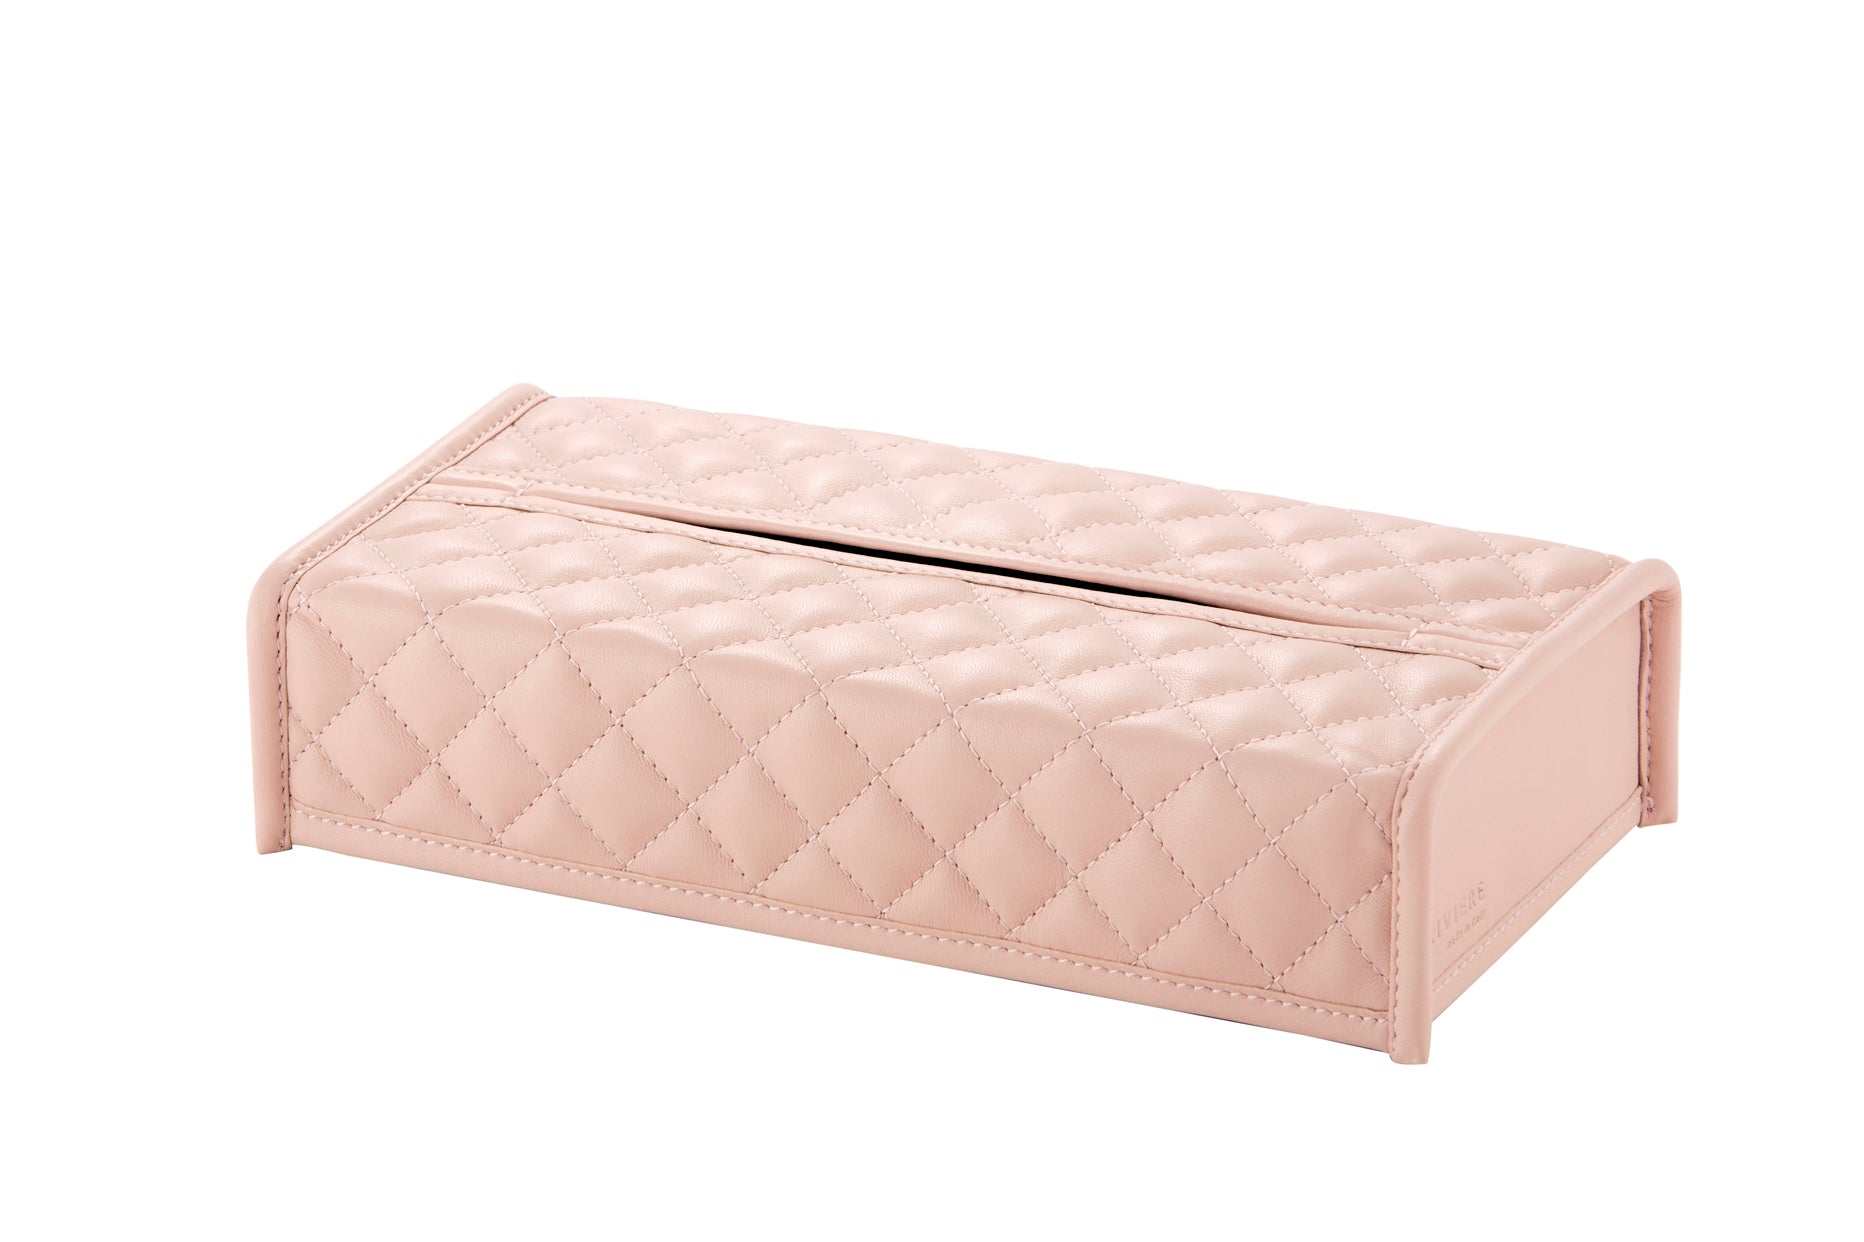 Riviere Elba Quilted Diamonds Leather Tissue Holder | Padded Leather Tissue Box Cover | Elegant Quilted Diamonds Design | Explore a Range of Luxury Home Accessories and Yacht Decor at 2Jour Concierge, #1 luxury high-end gift & lifestyle shop